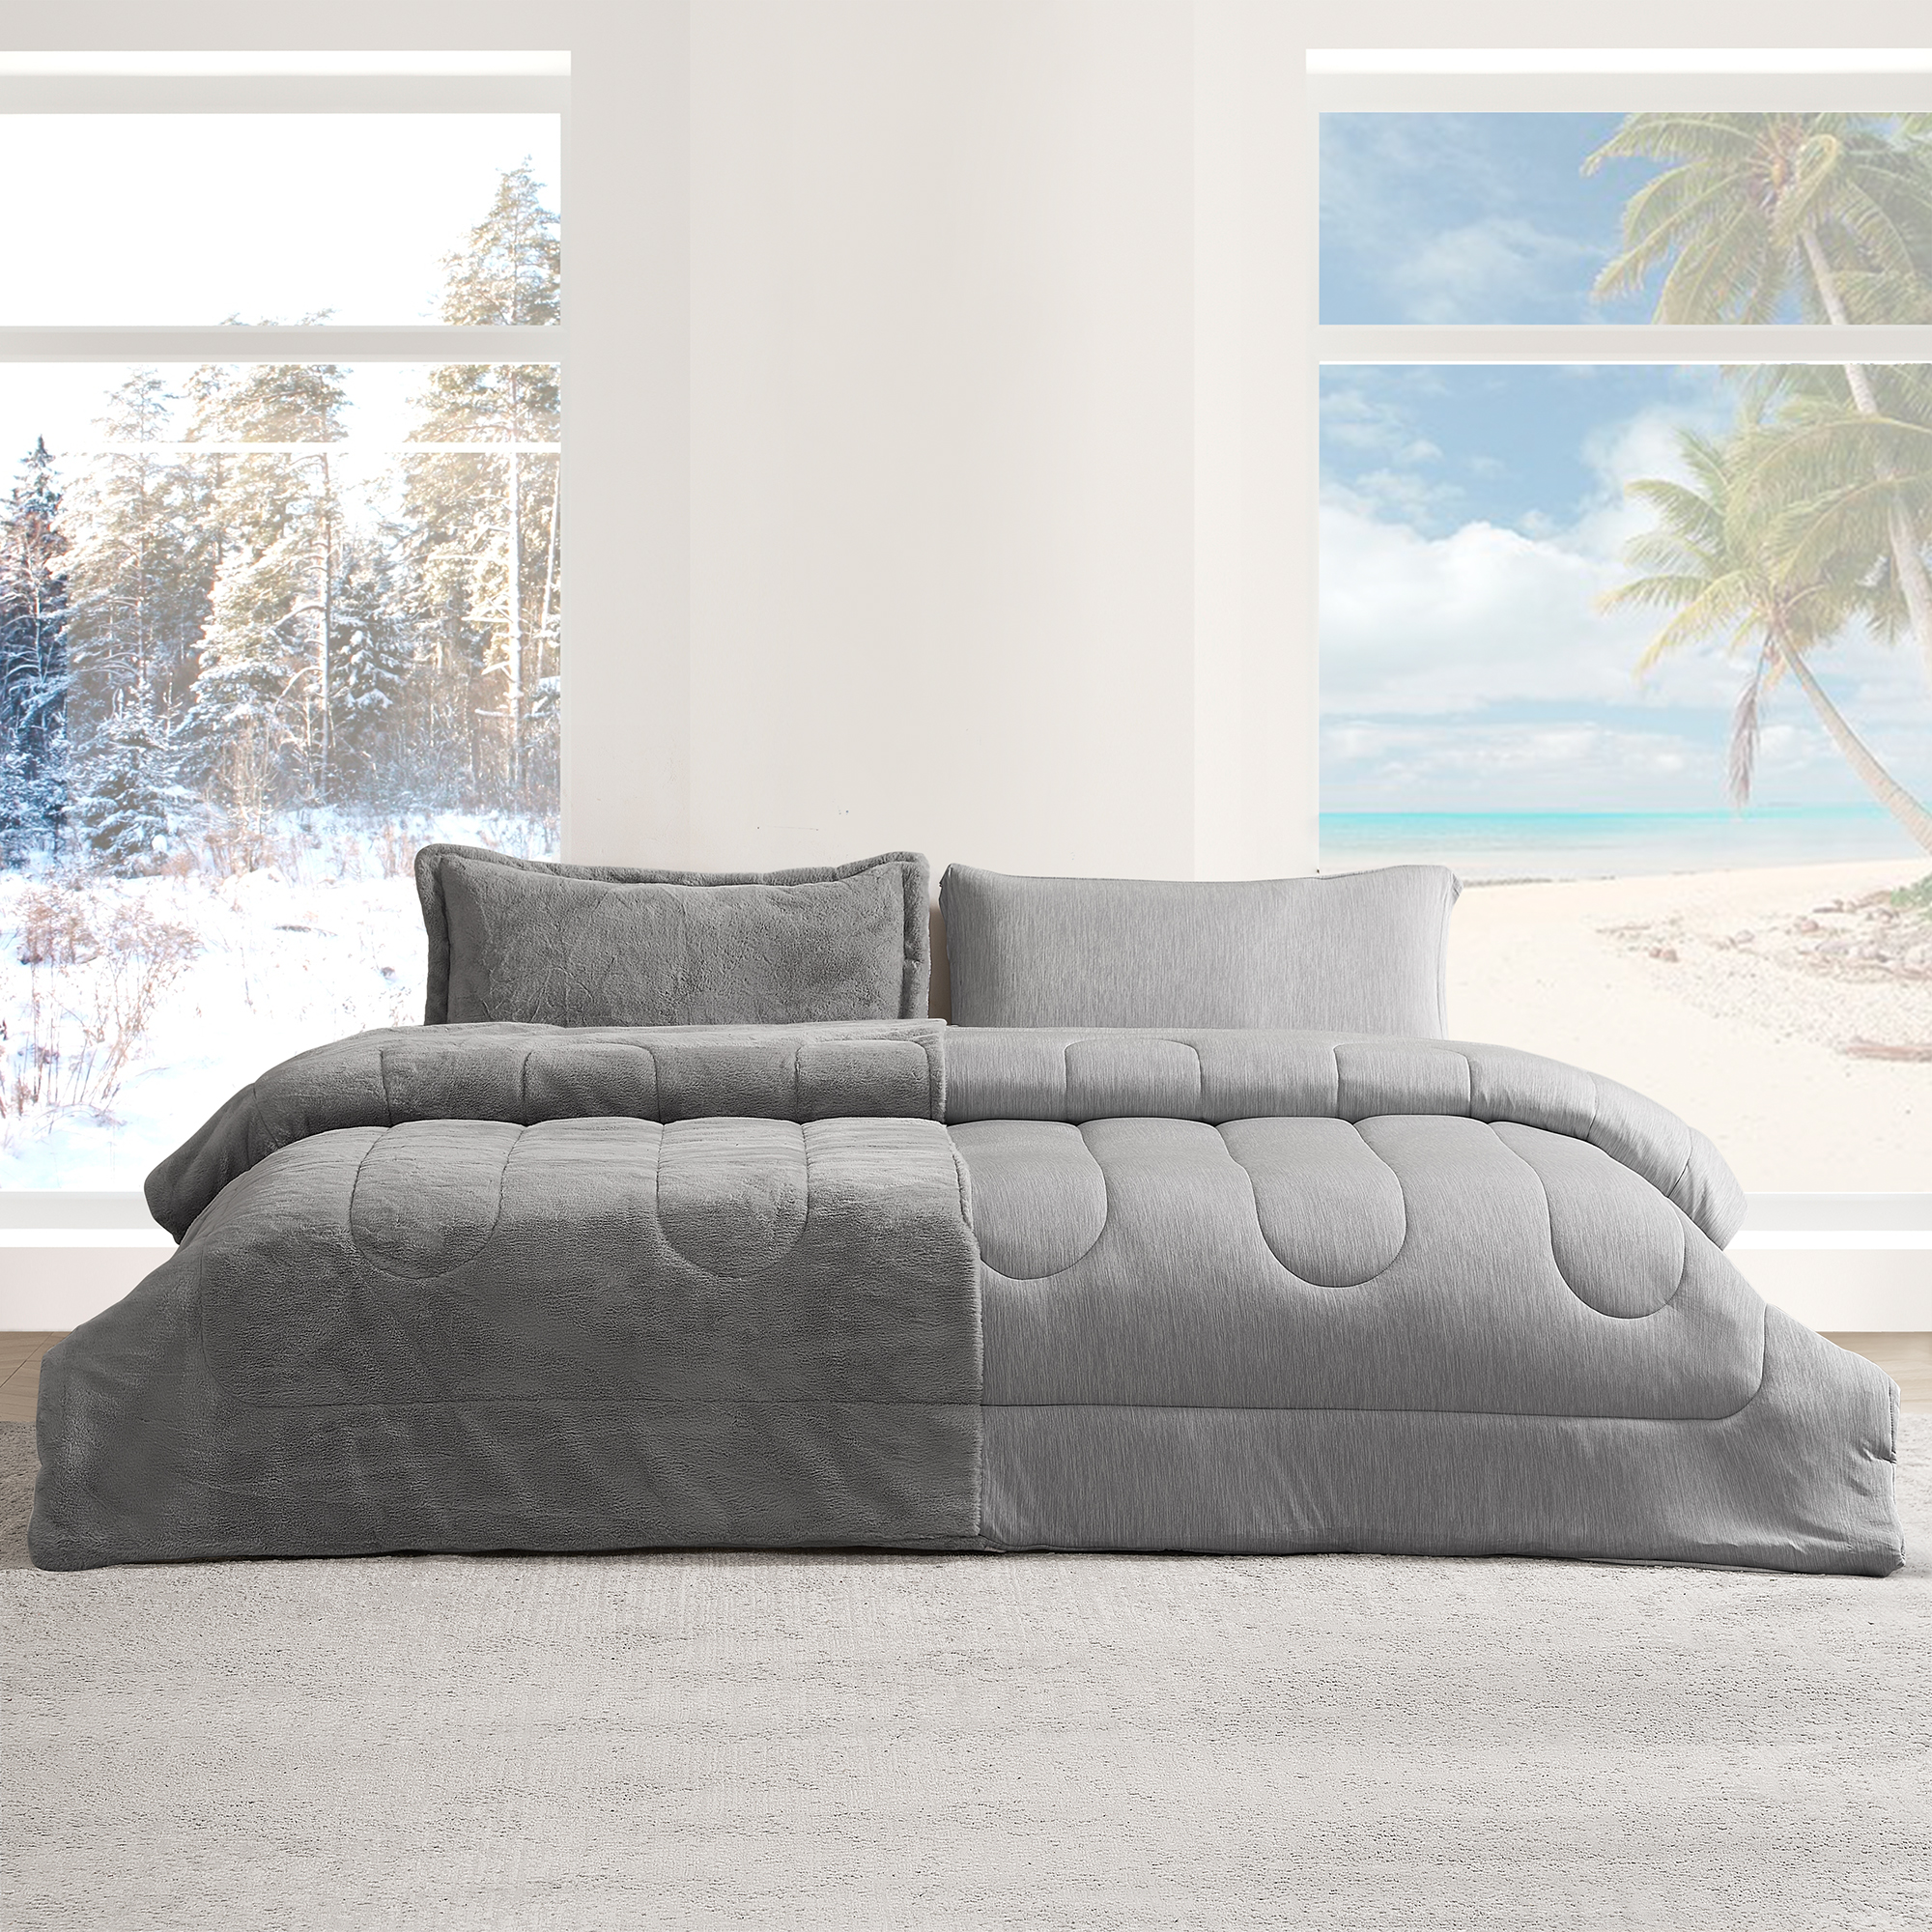 Opposites Attract - Coma Inducer Oversized Queen Comforter - Plush Chartreux Gray + Cooling Silver Gray